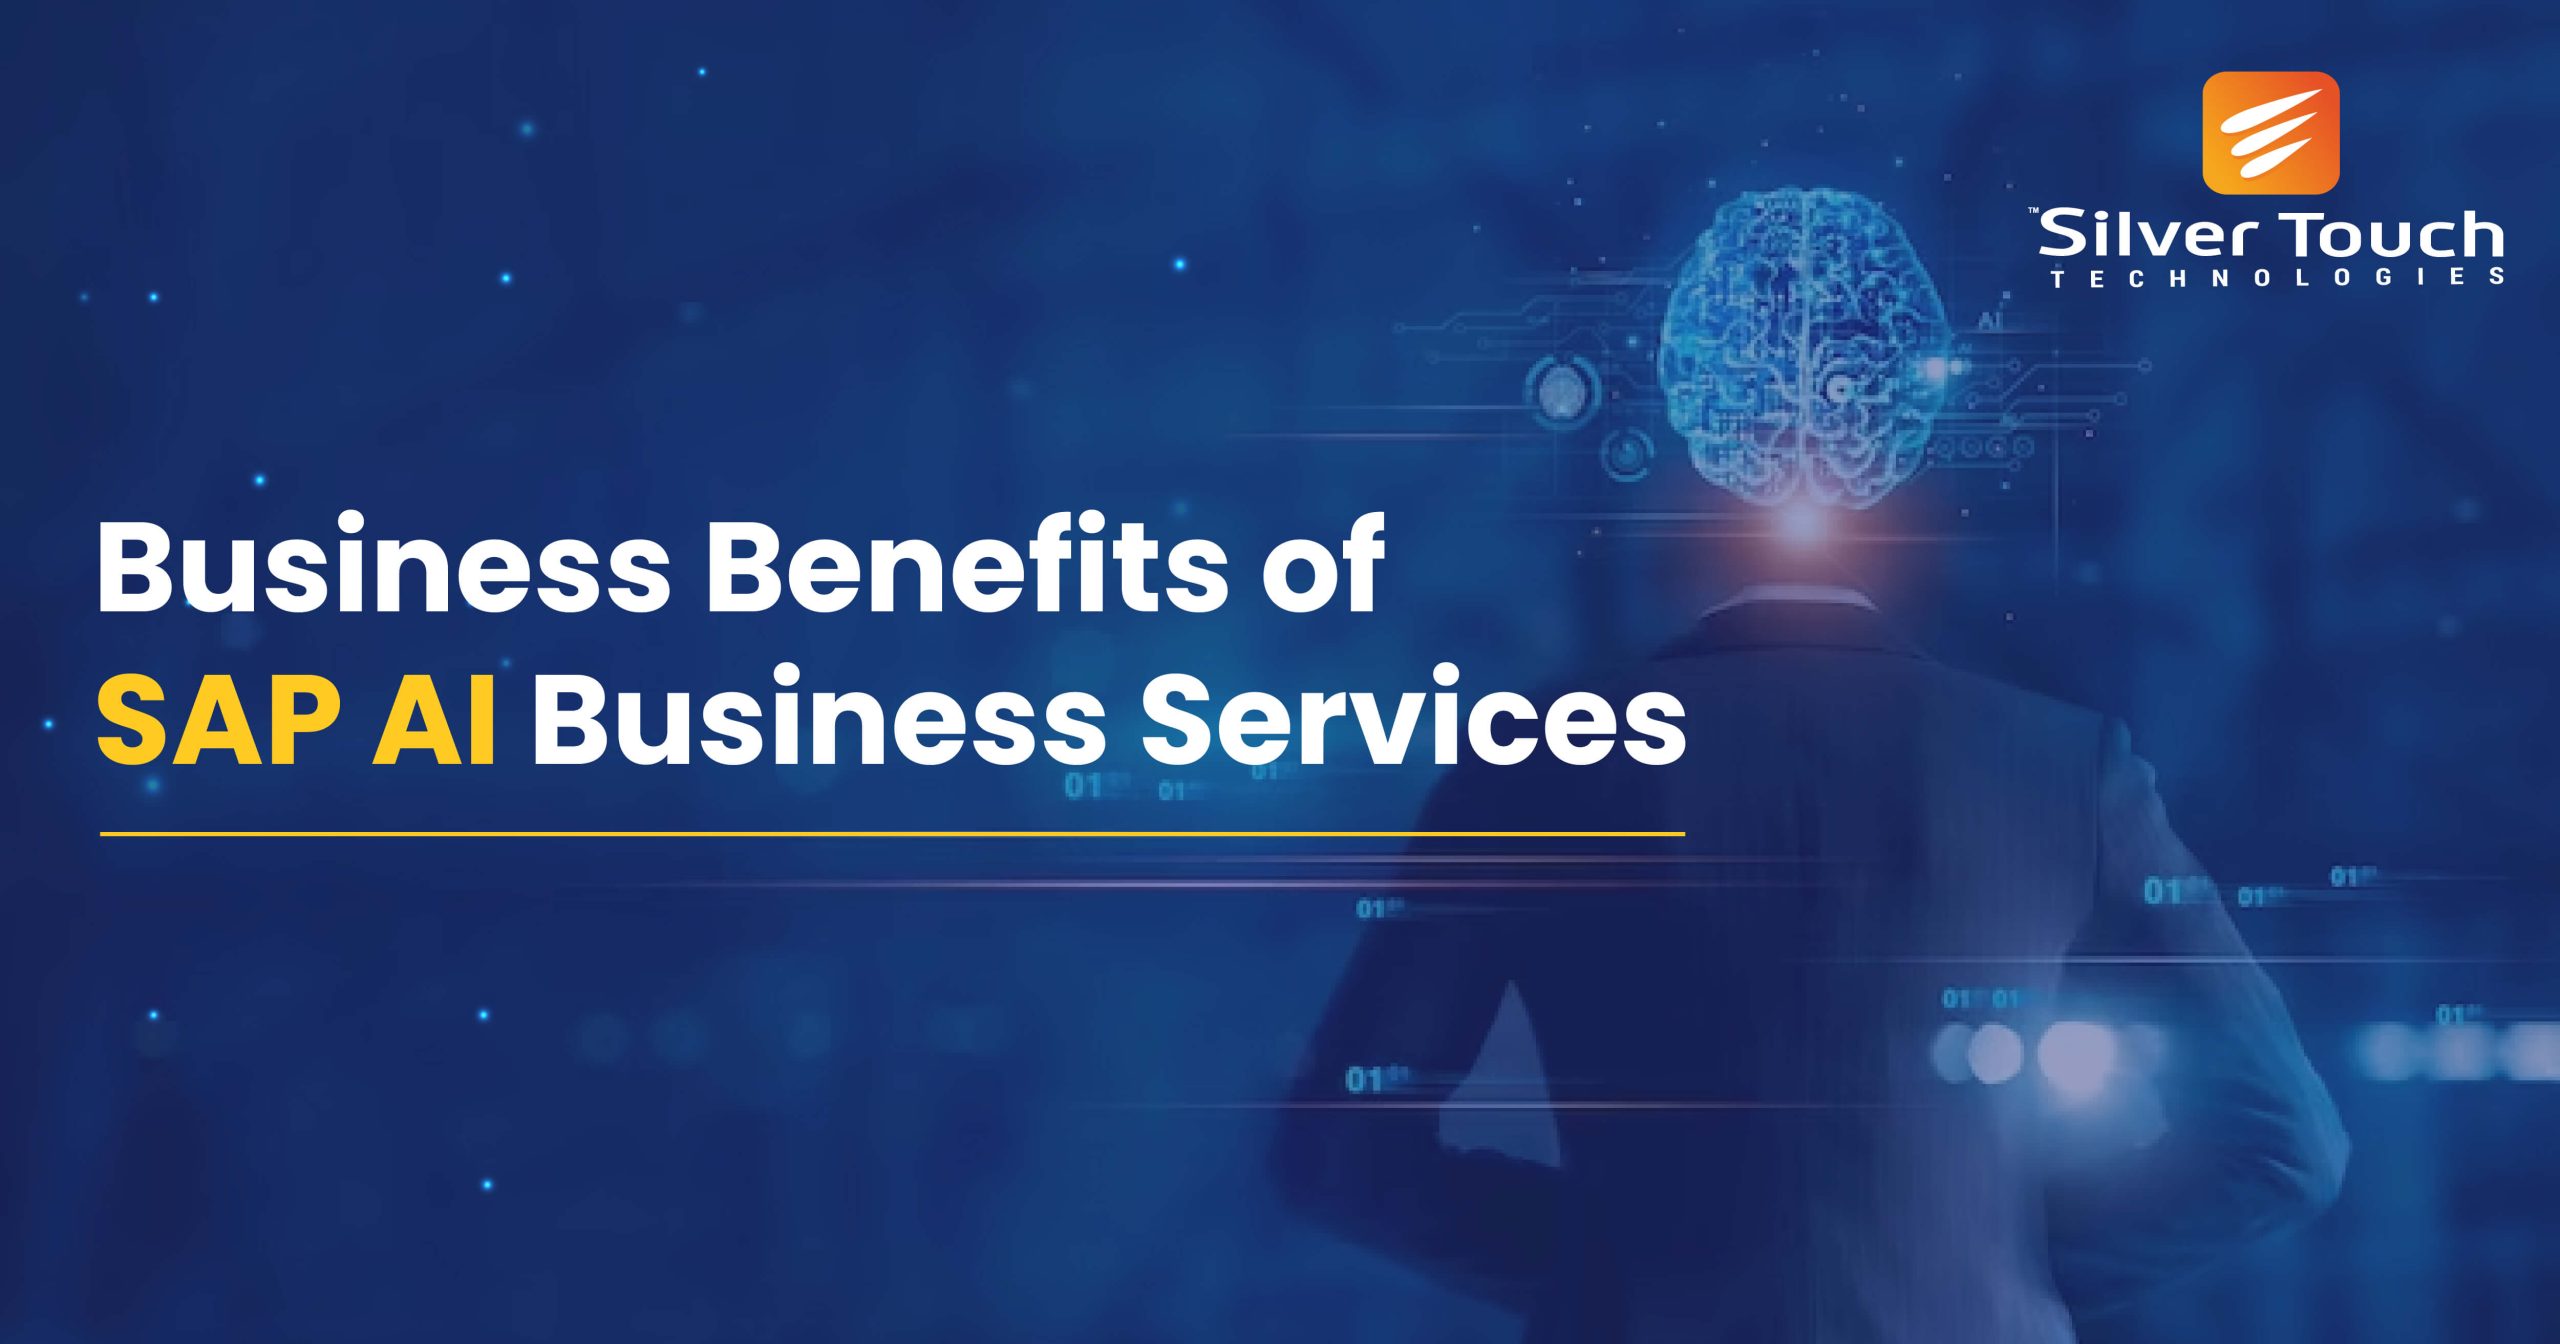 Business Benefits of SAP AI Business Services